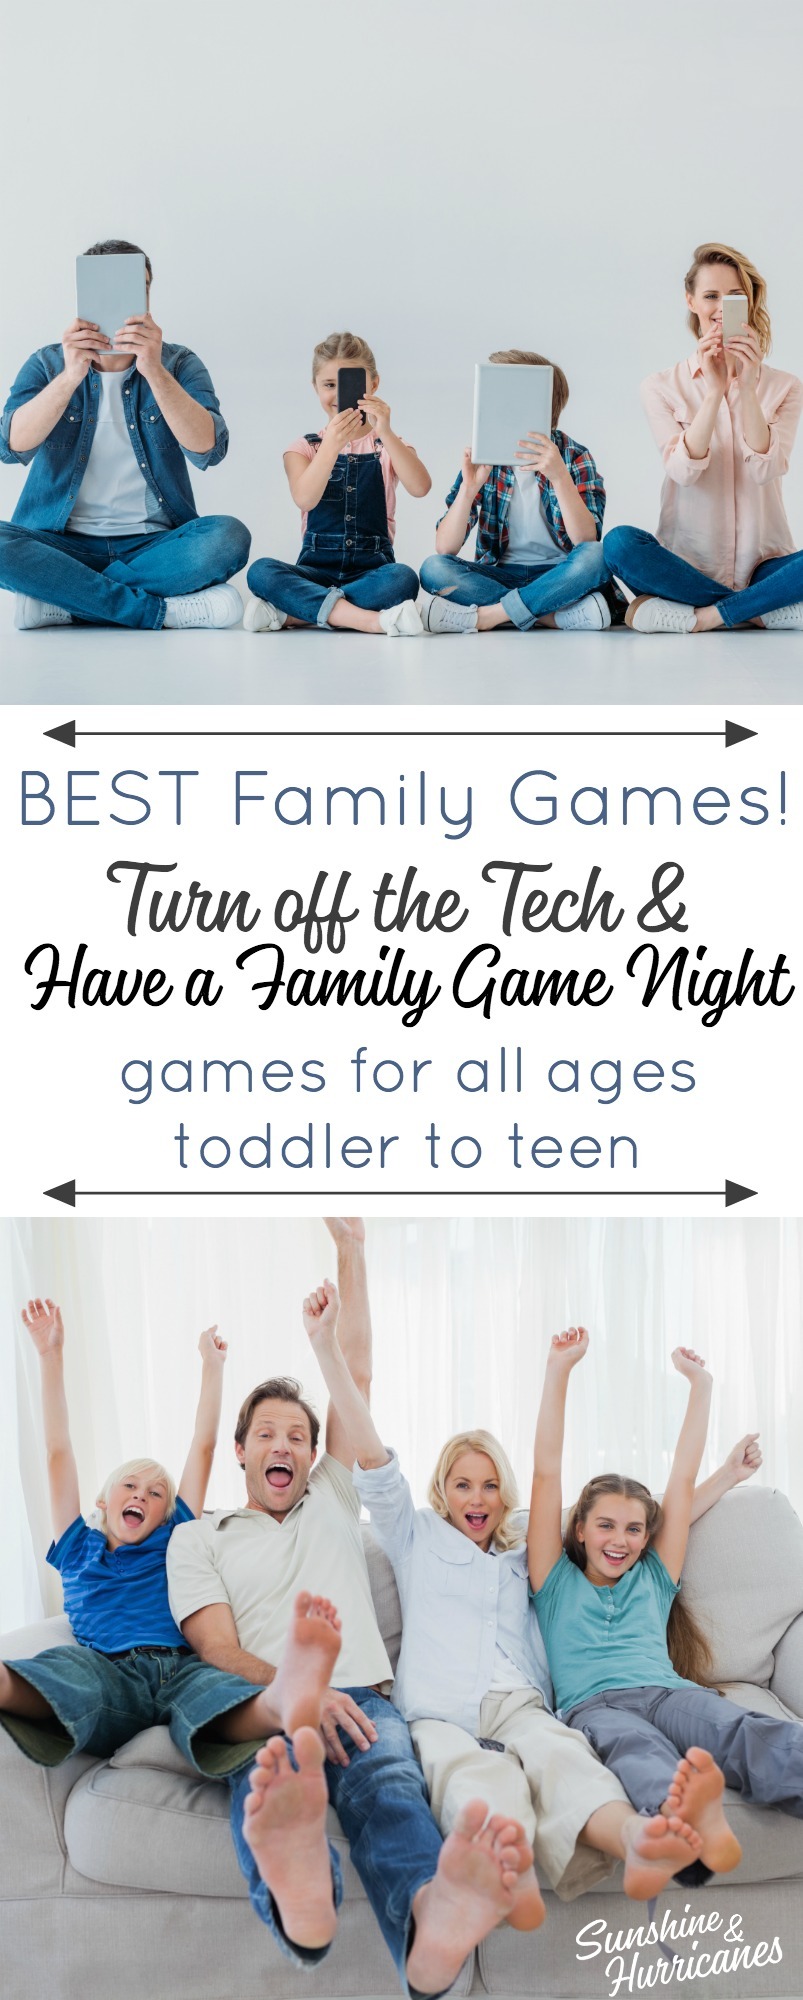 Best Family Games - Board Games for Toddlers to Board Games for Teens. Fun for the whole family to get you off your tech and bringing family game night back! 